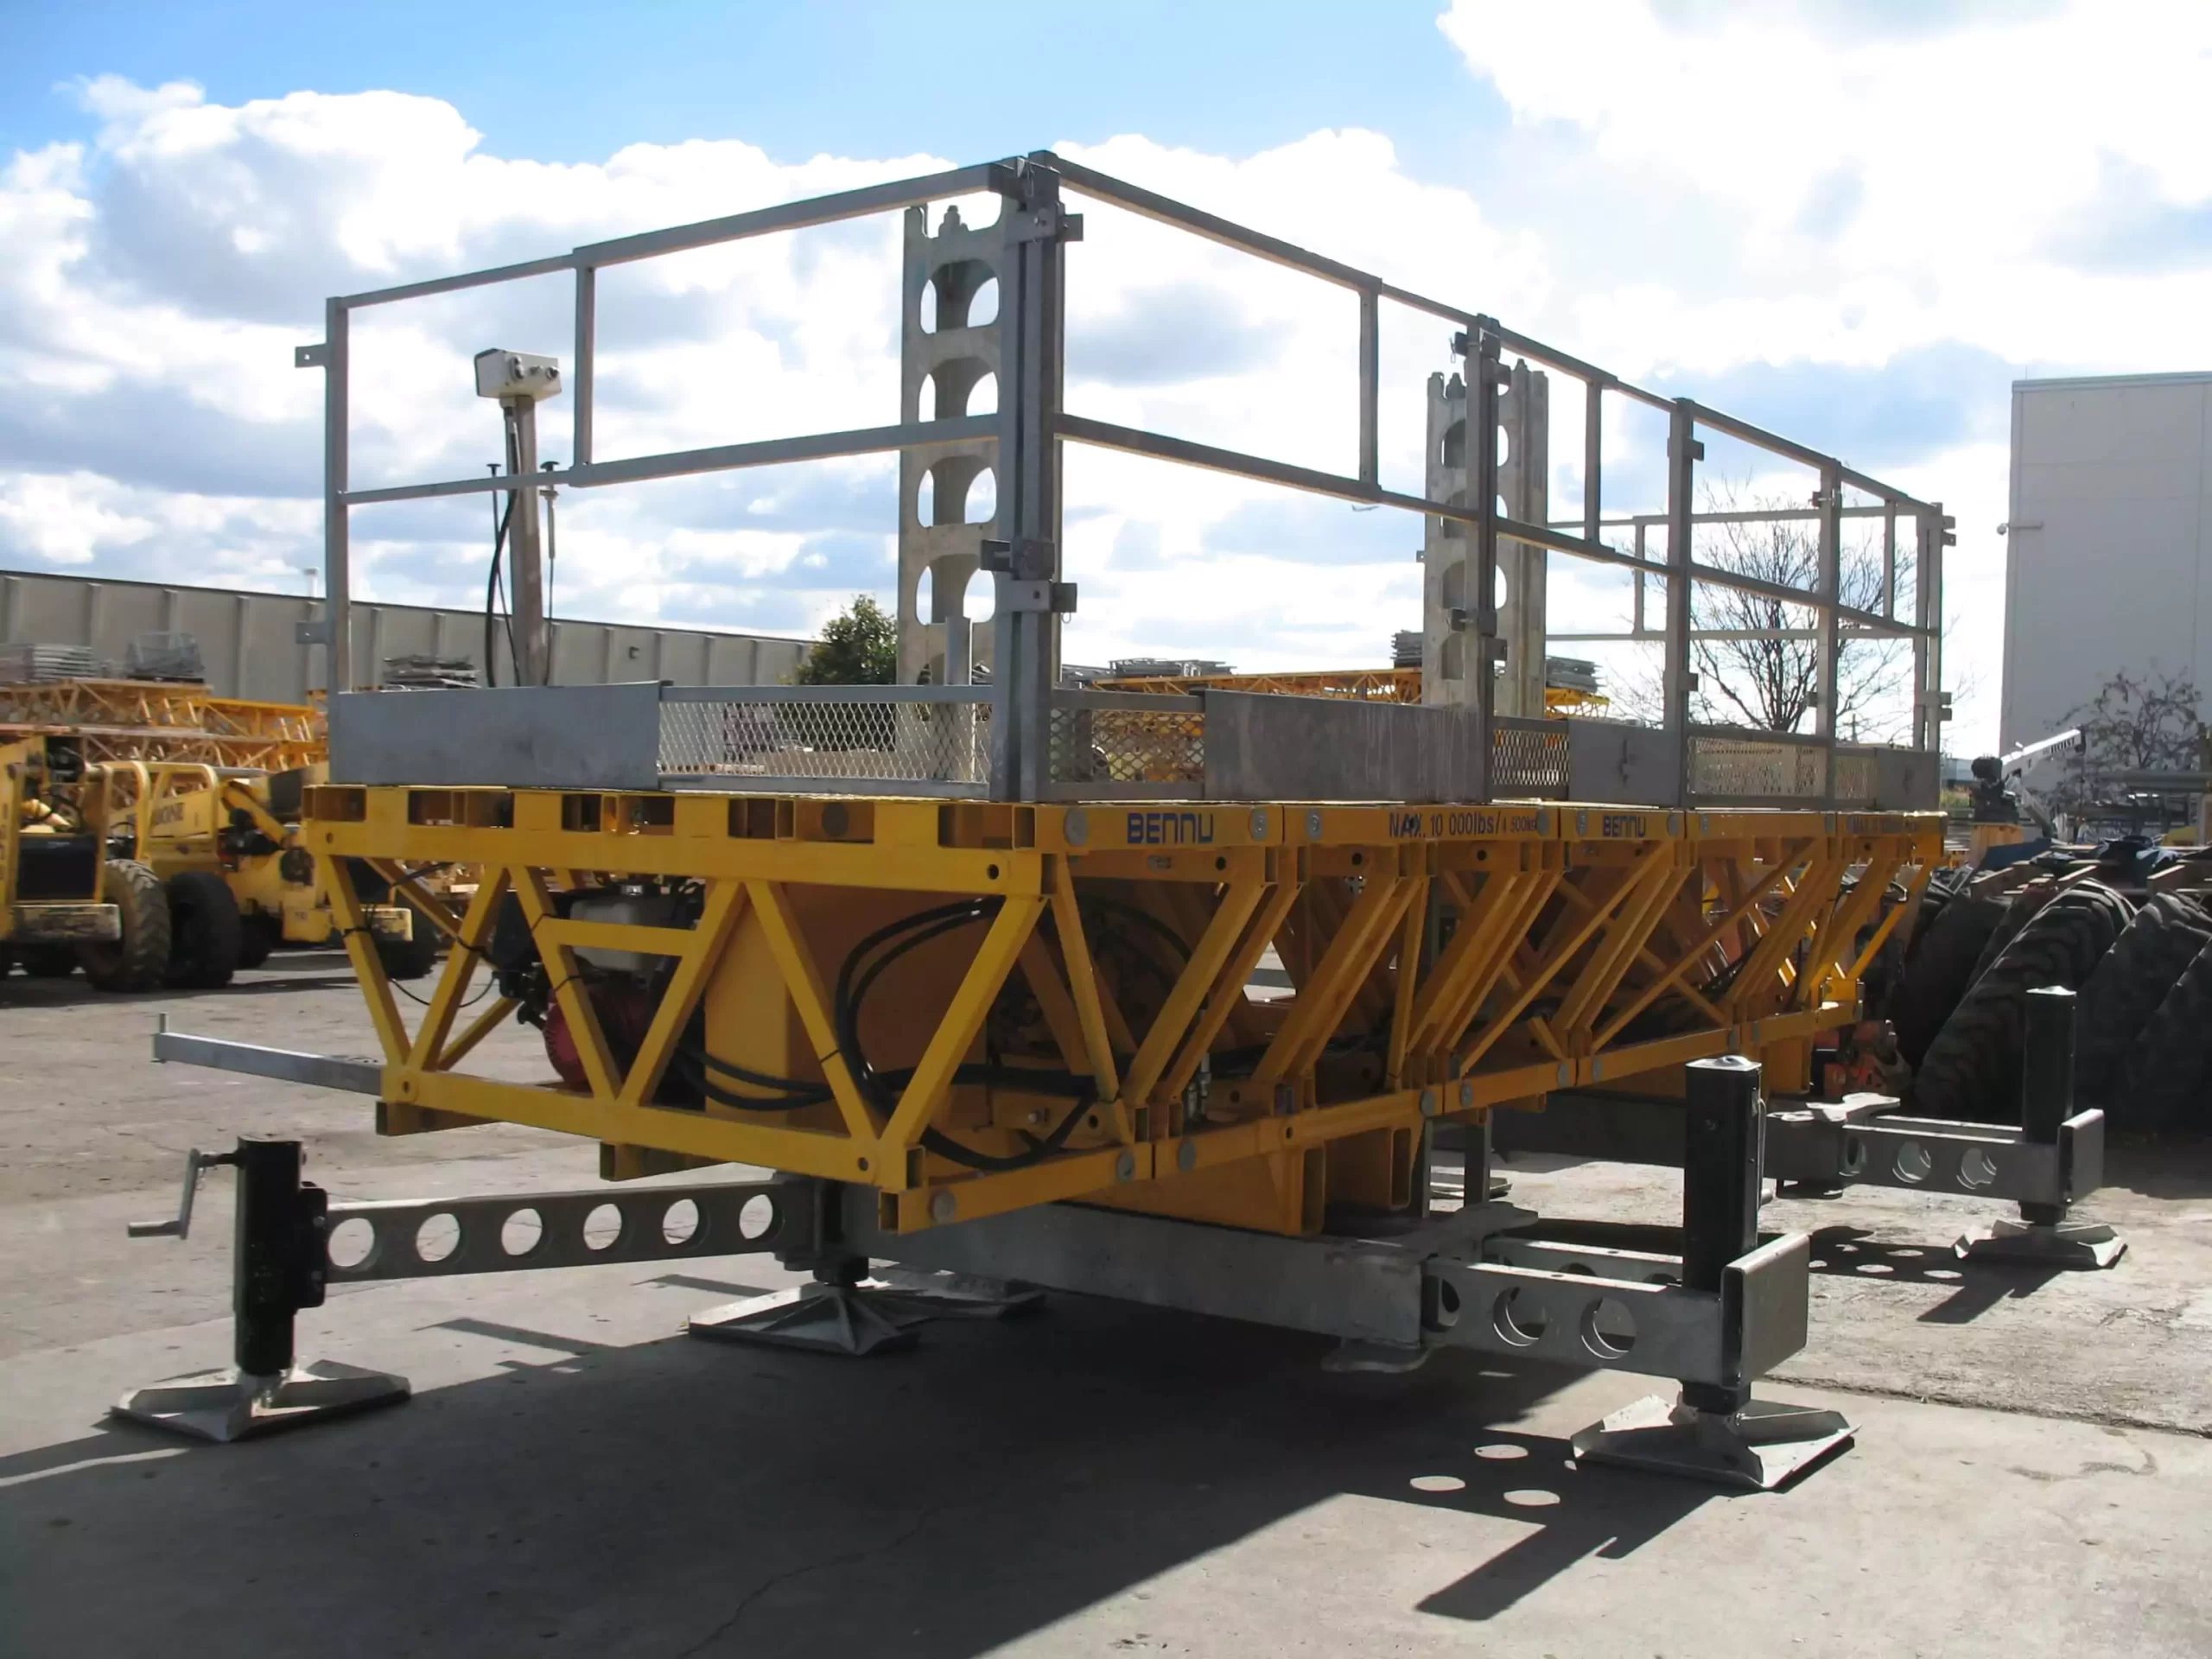 Work Platforms designed and manufactured by Bennu Parts